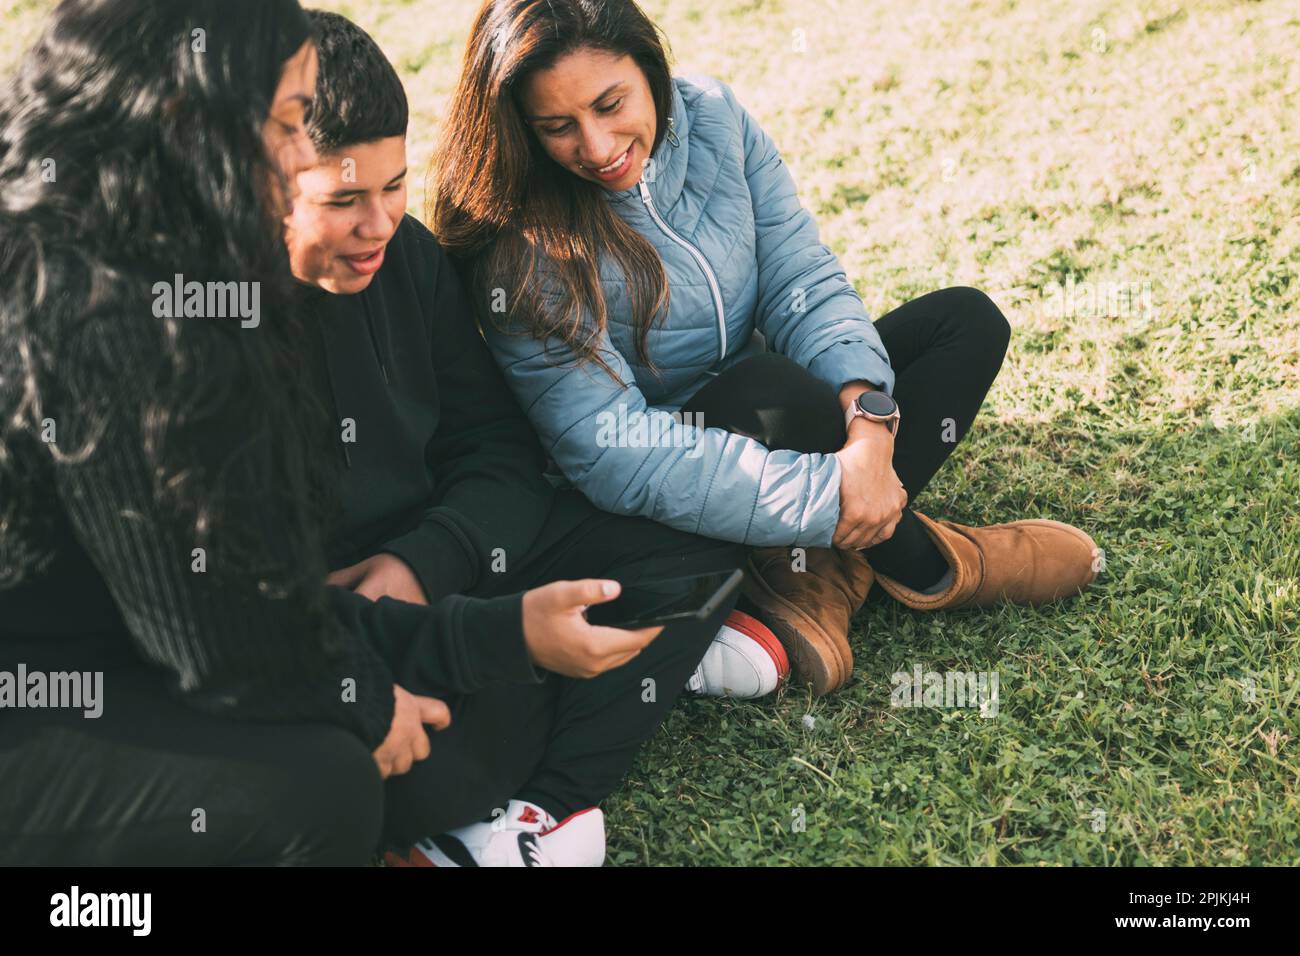 Hispanic family spending quality time together in a local park on a beautiful, sunny day. A teenage boy is sitting on the grass, holding his Stock Photo